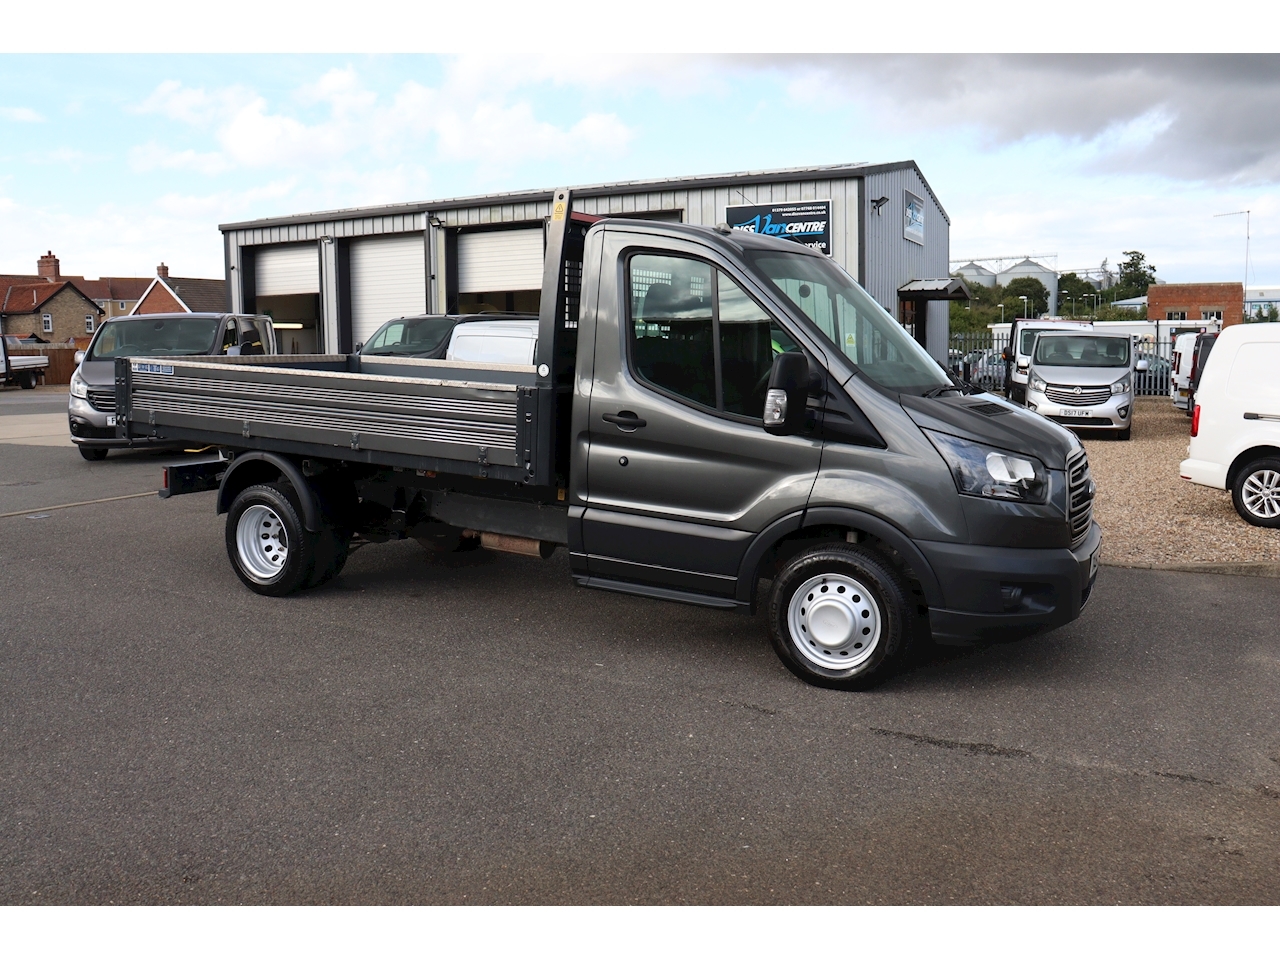 Transit 350 EcoBlue 2.0 2dr One Stop Tipper Manual Diesel